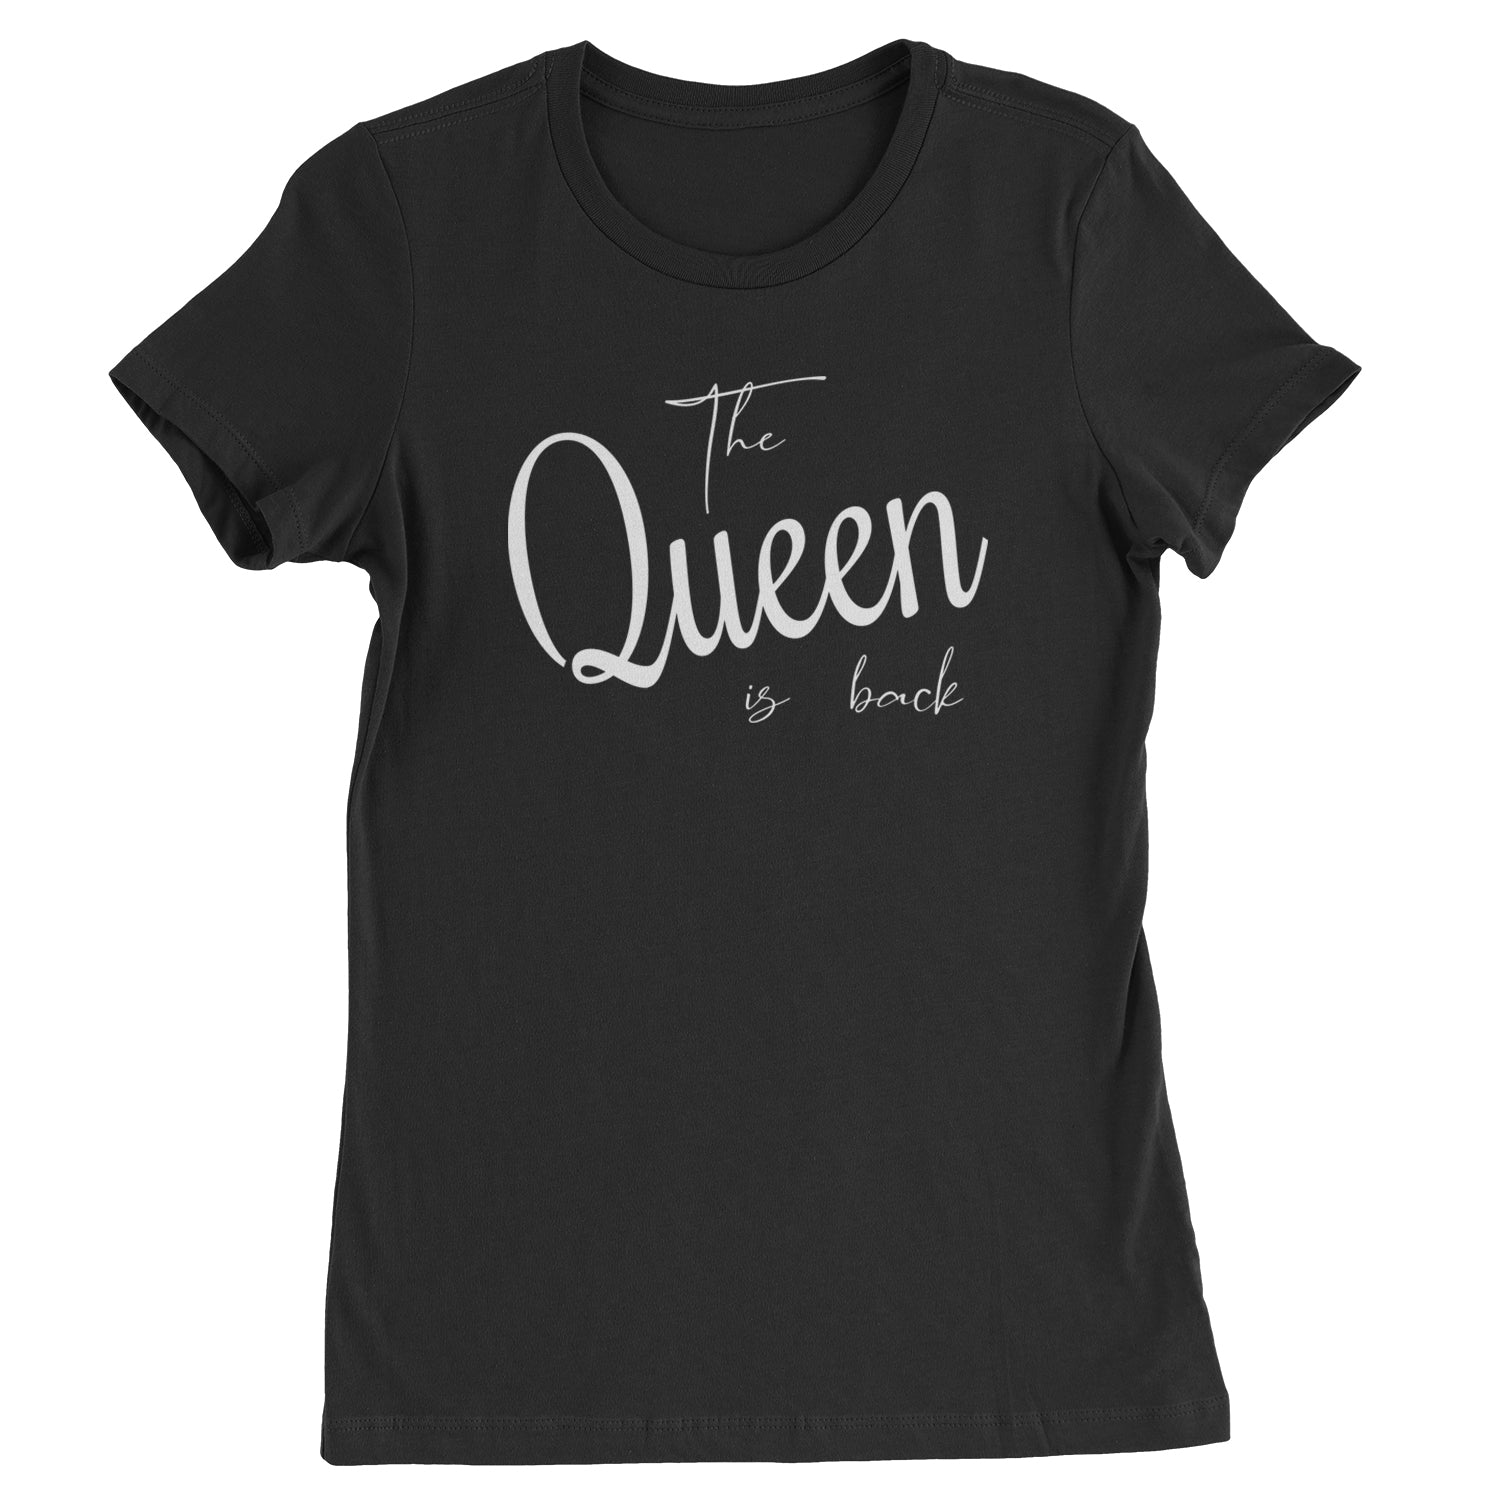 The Queen Is Back Celebration Womens T-shirt